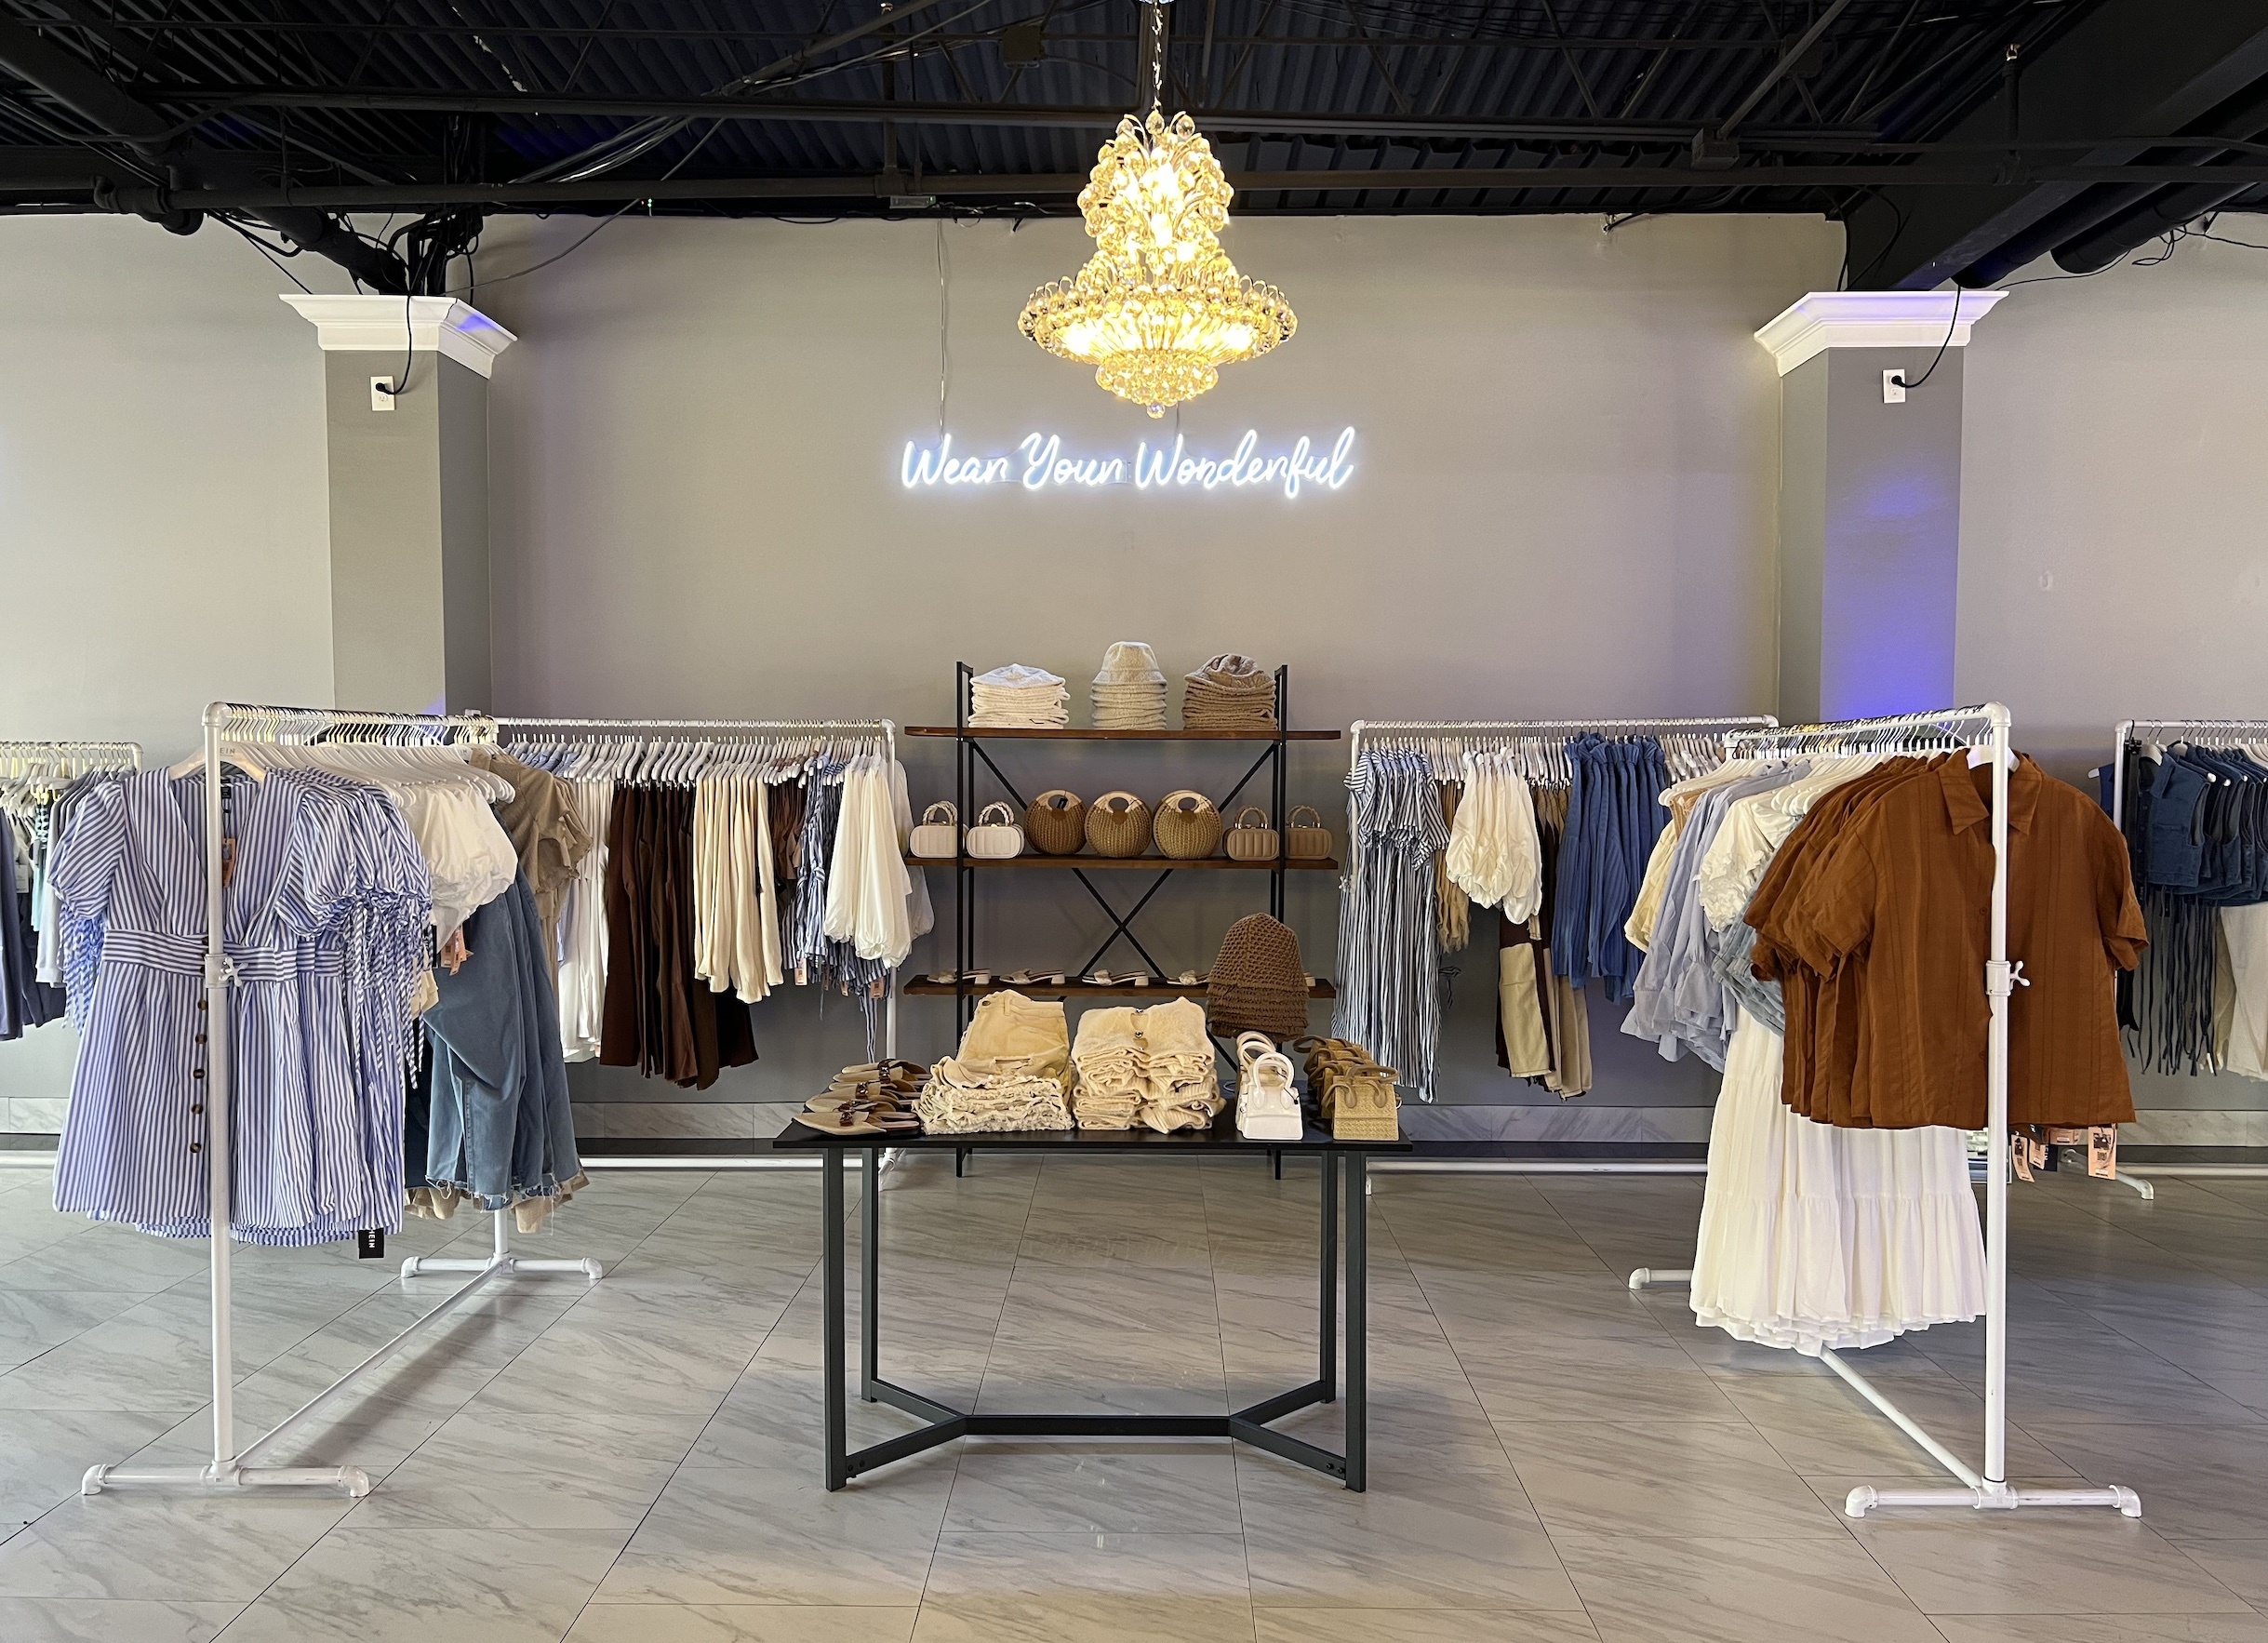 Fashion retailer Shein announces pop-up shop at Plano's The Shops at Willow  Bend